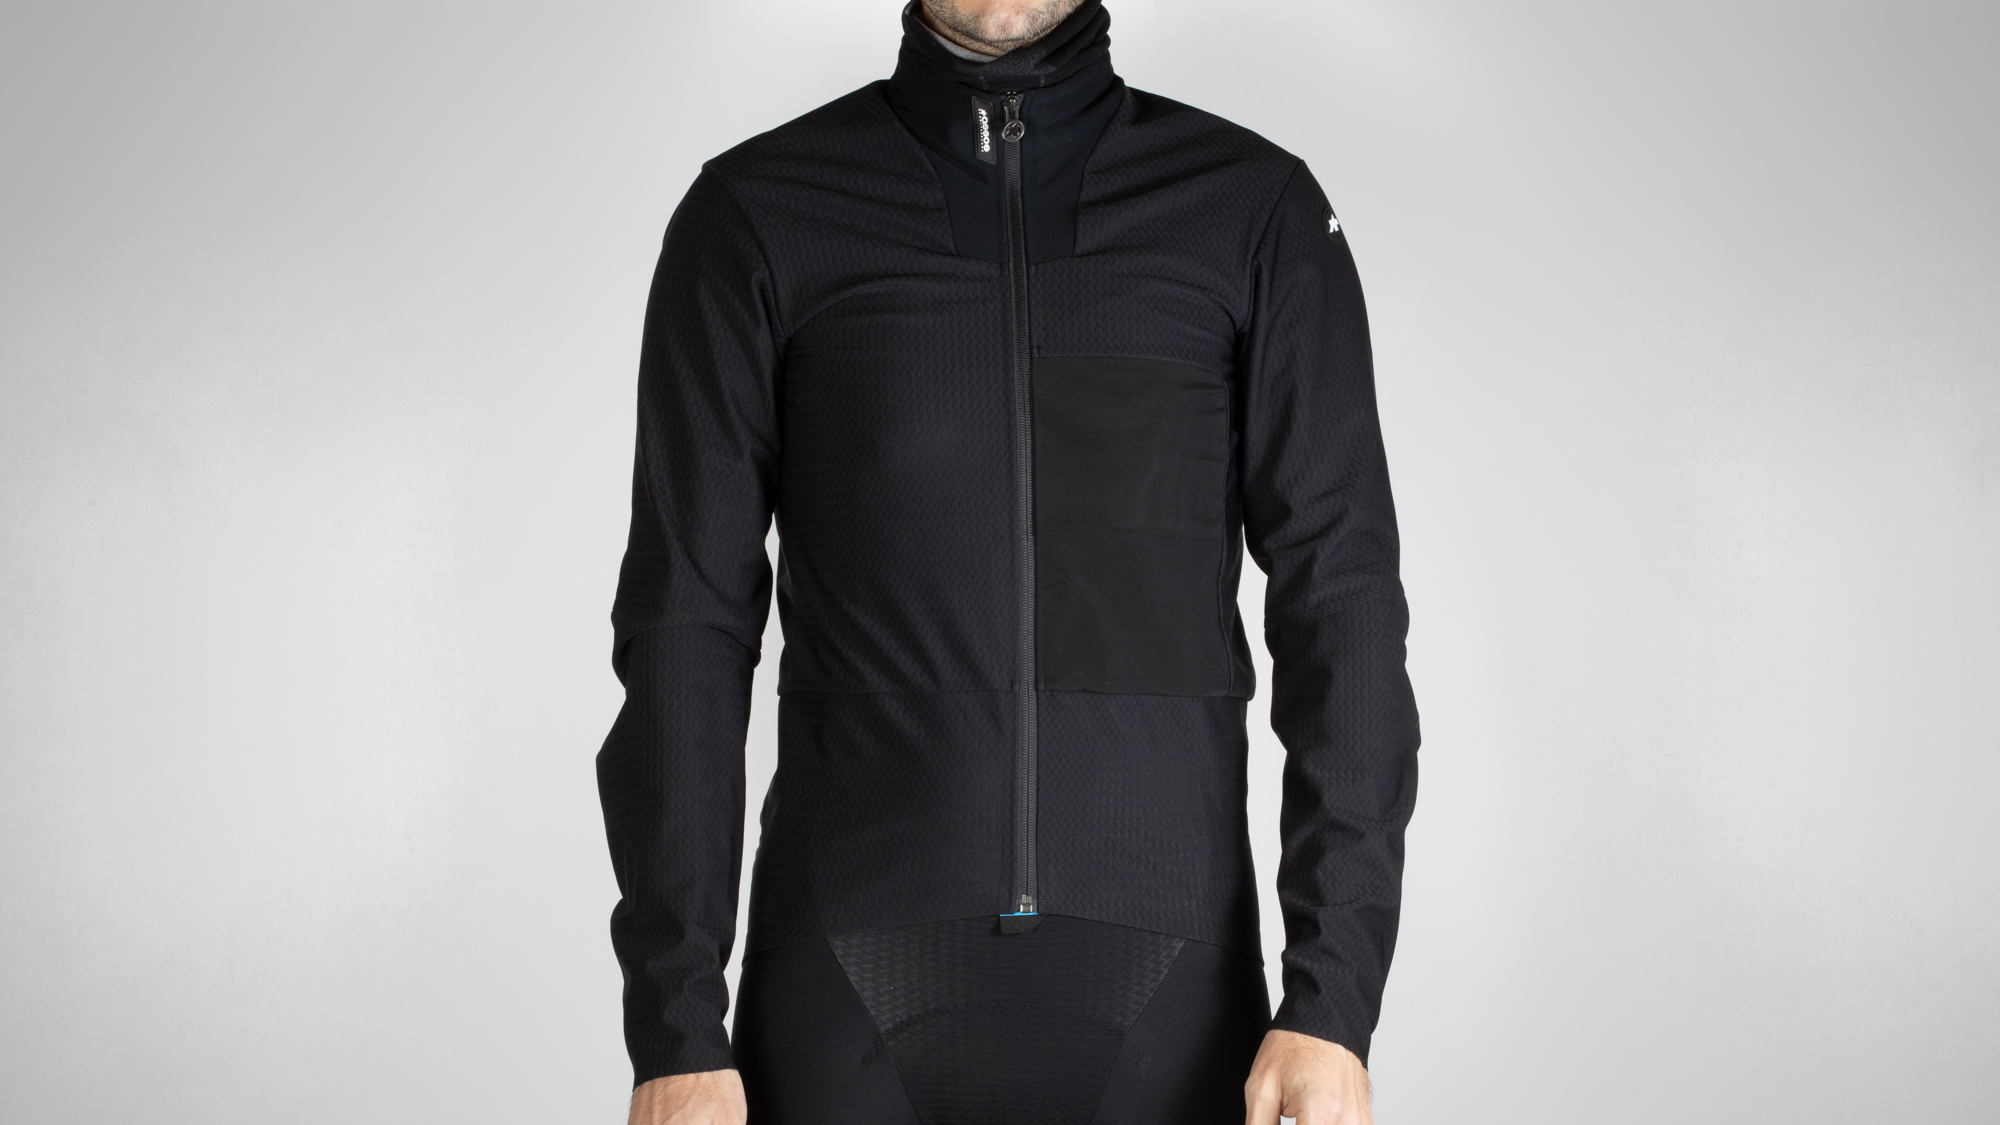 Is the Assos Equipe R Habu Winter Jacket S9 the best the brand